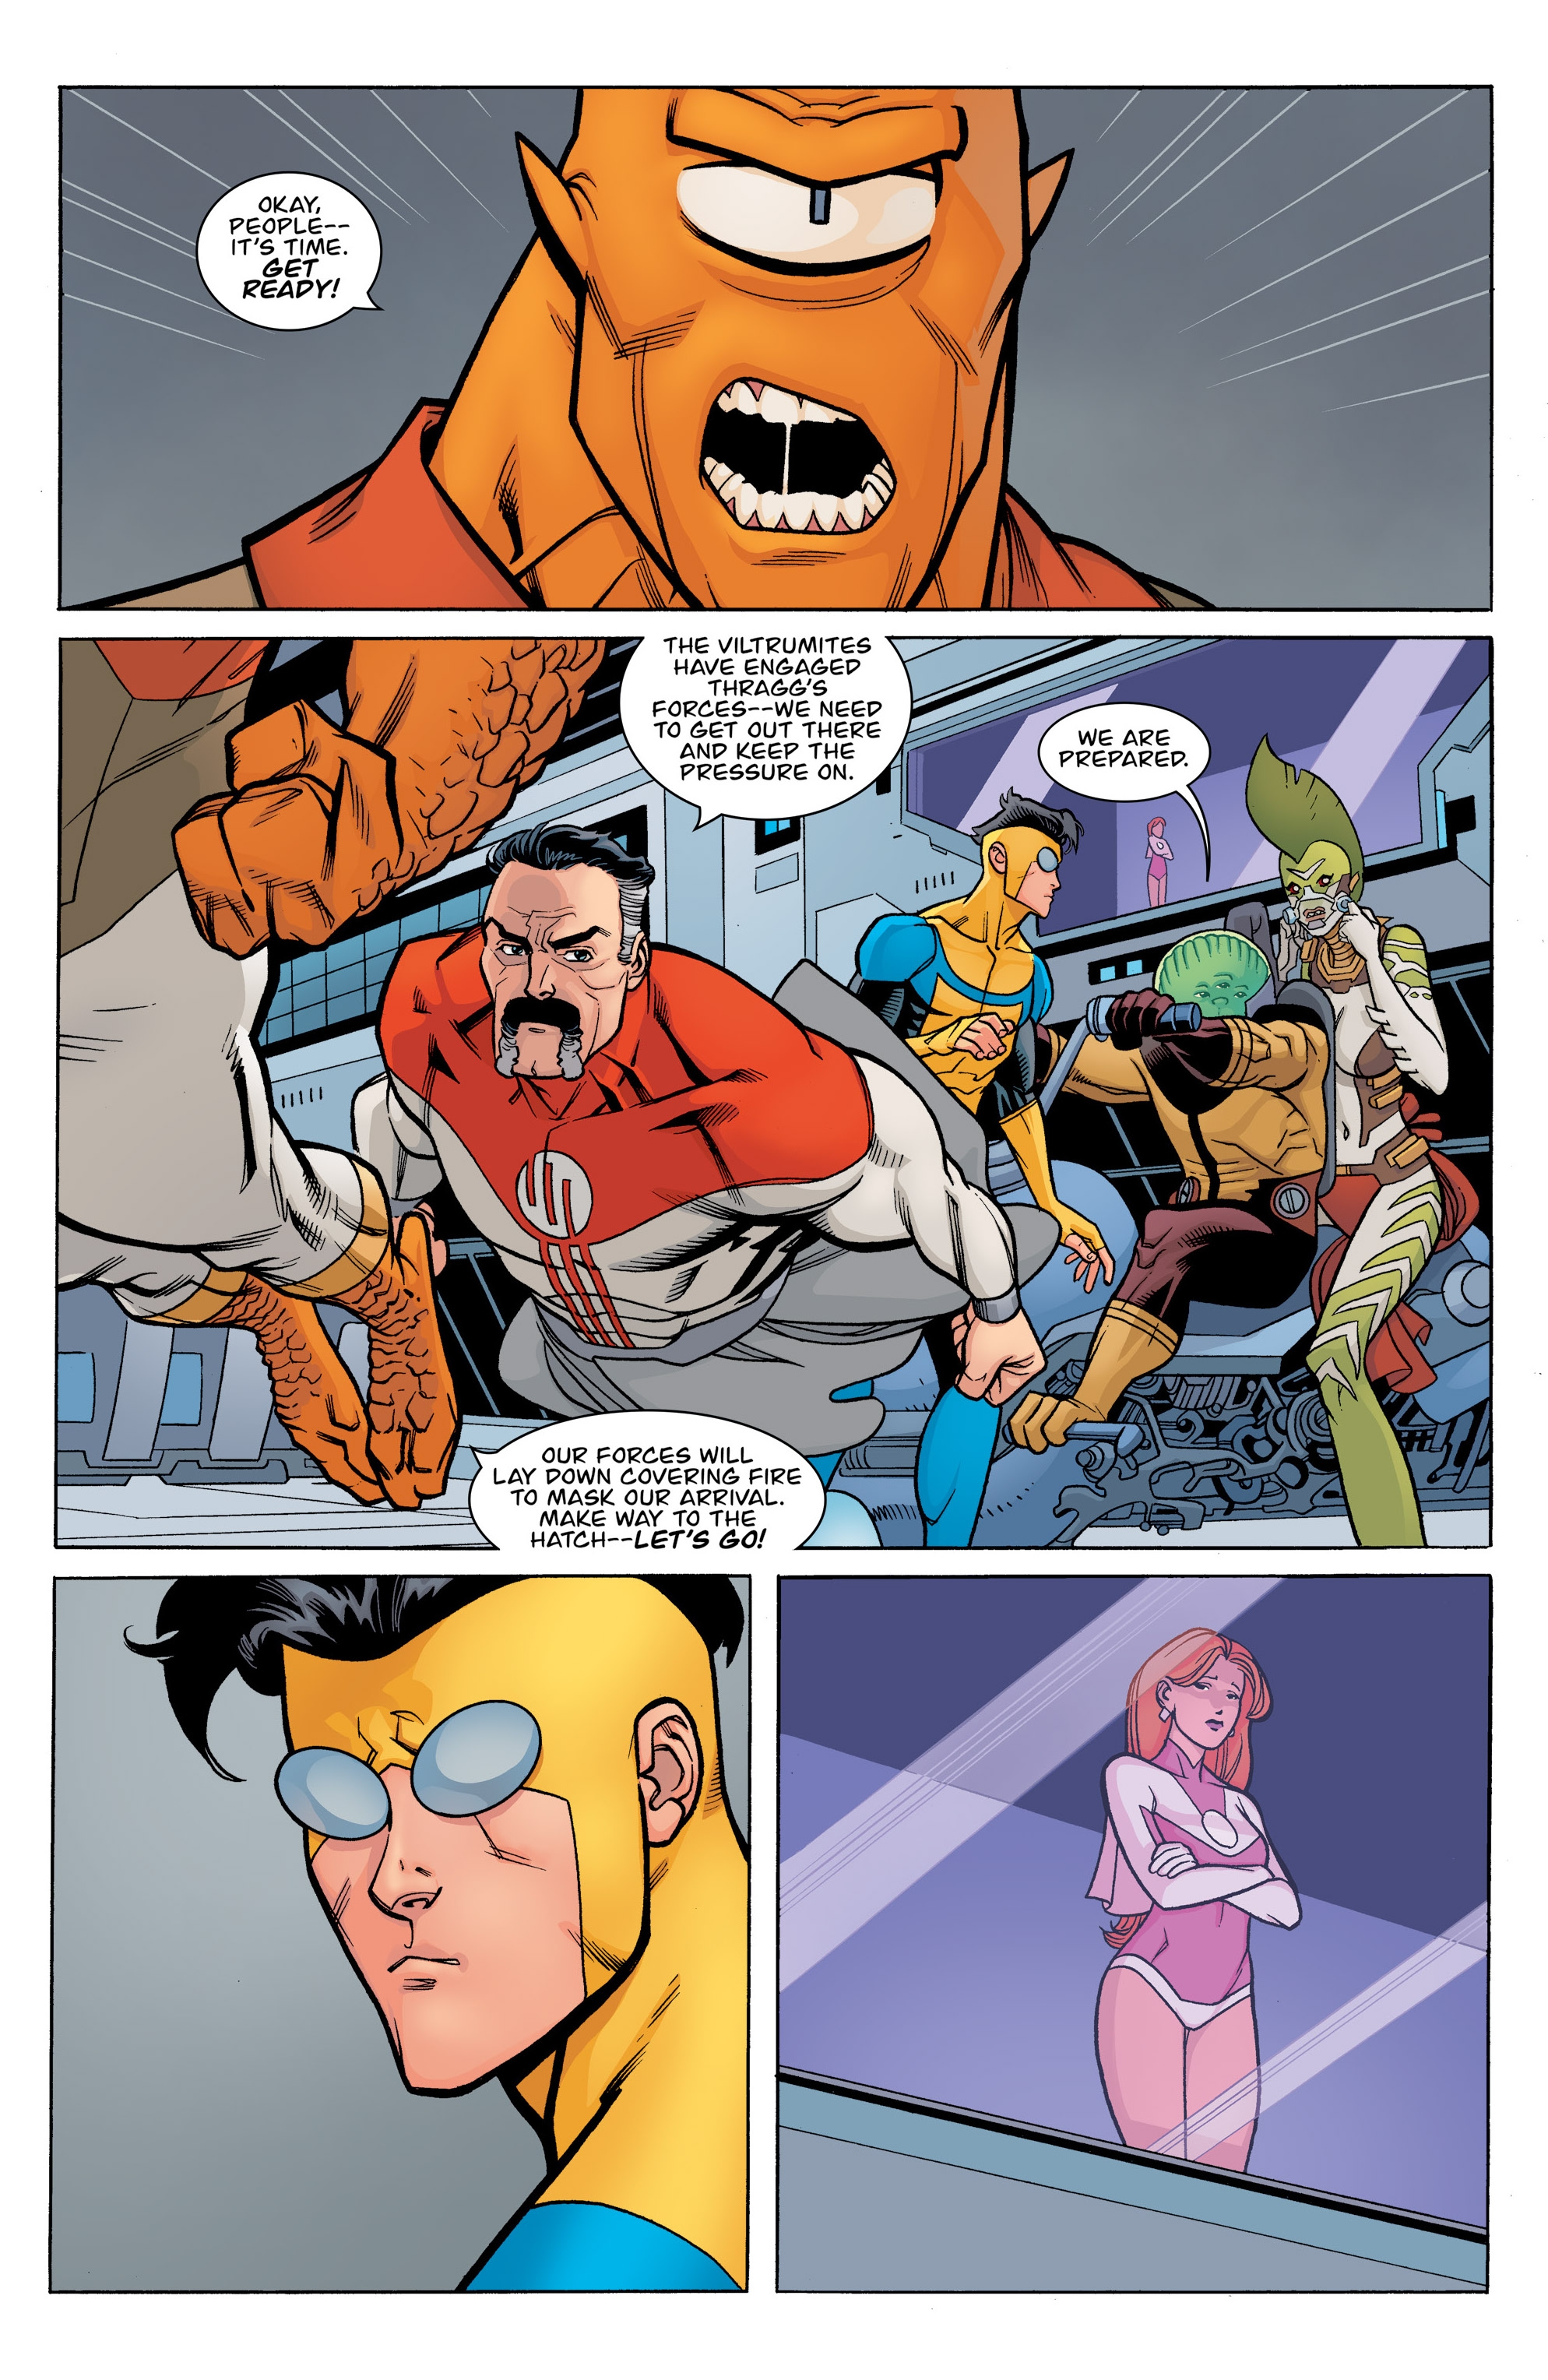 Invincible (2005-): Chapter 138 - Page 3